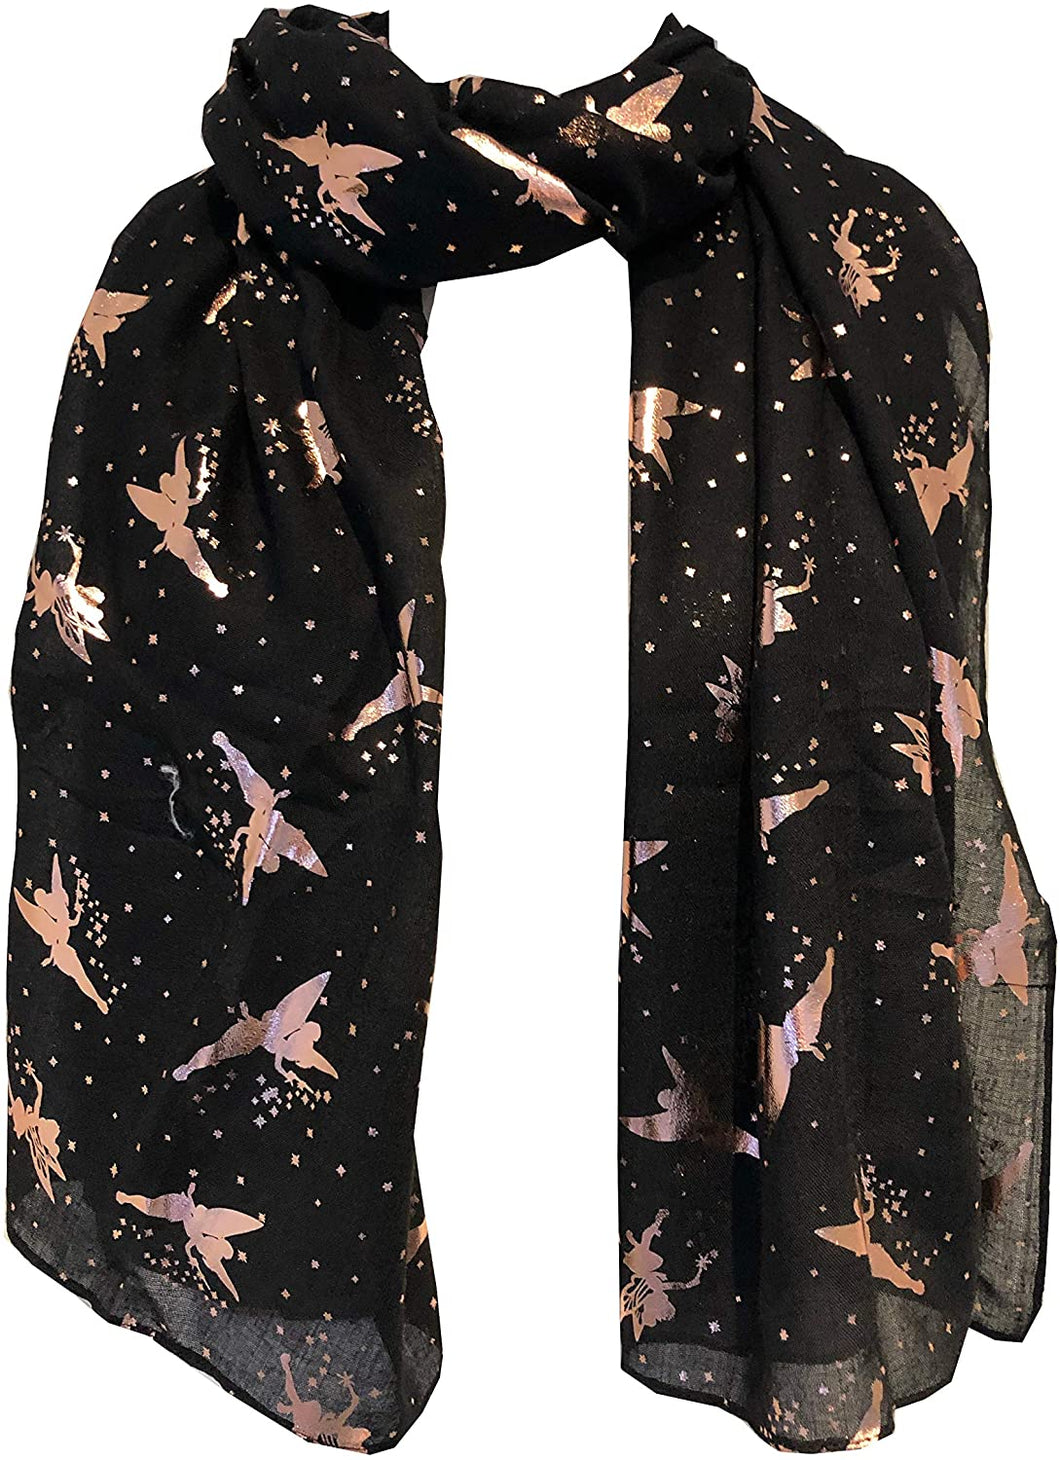 Pamper Yourself Now Black with Gold Fairy Design Long Scarf/wrap